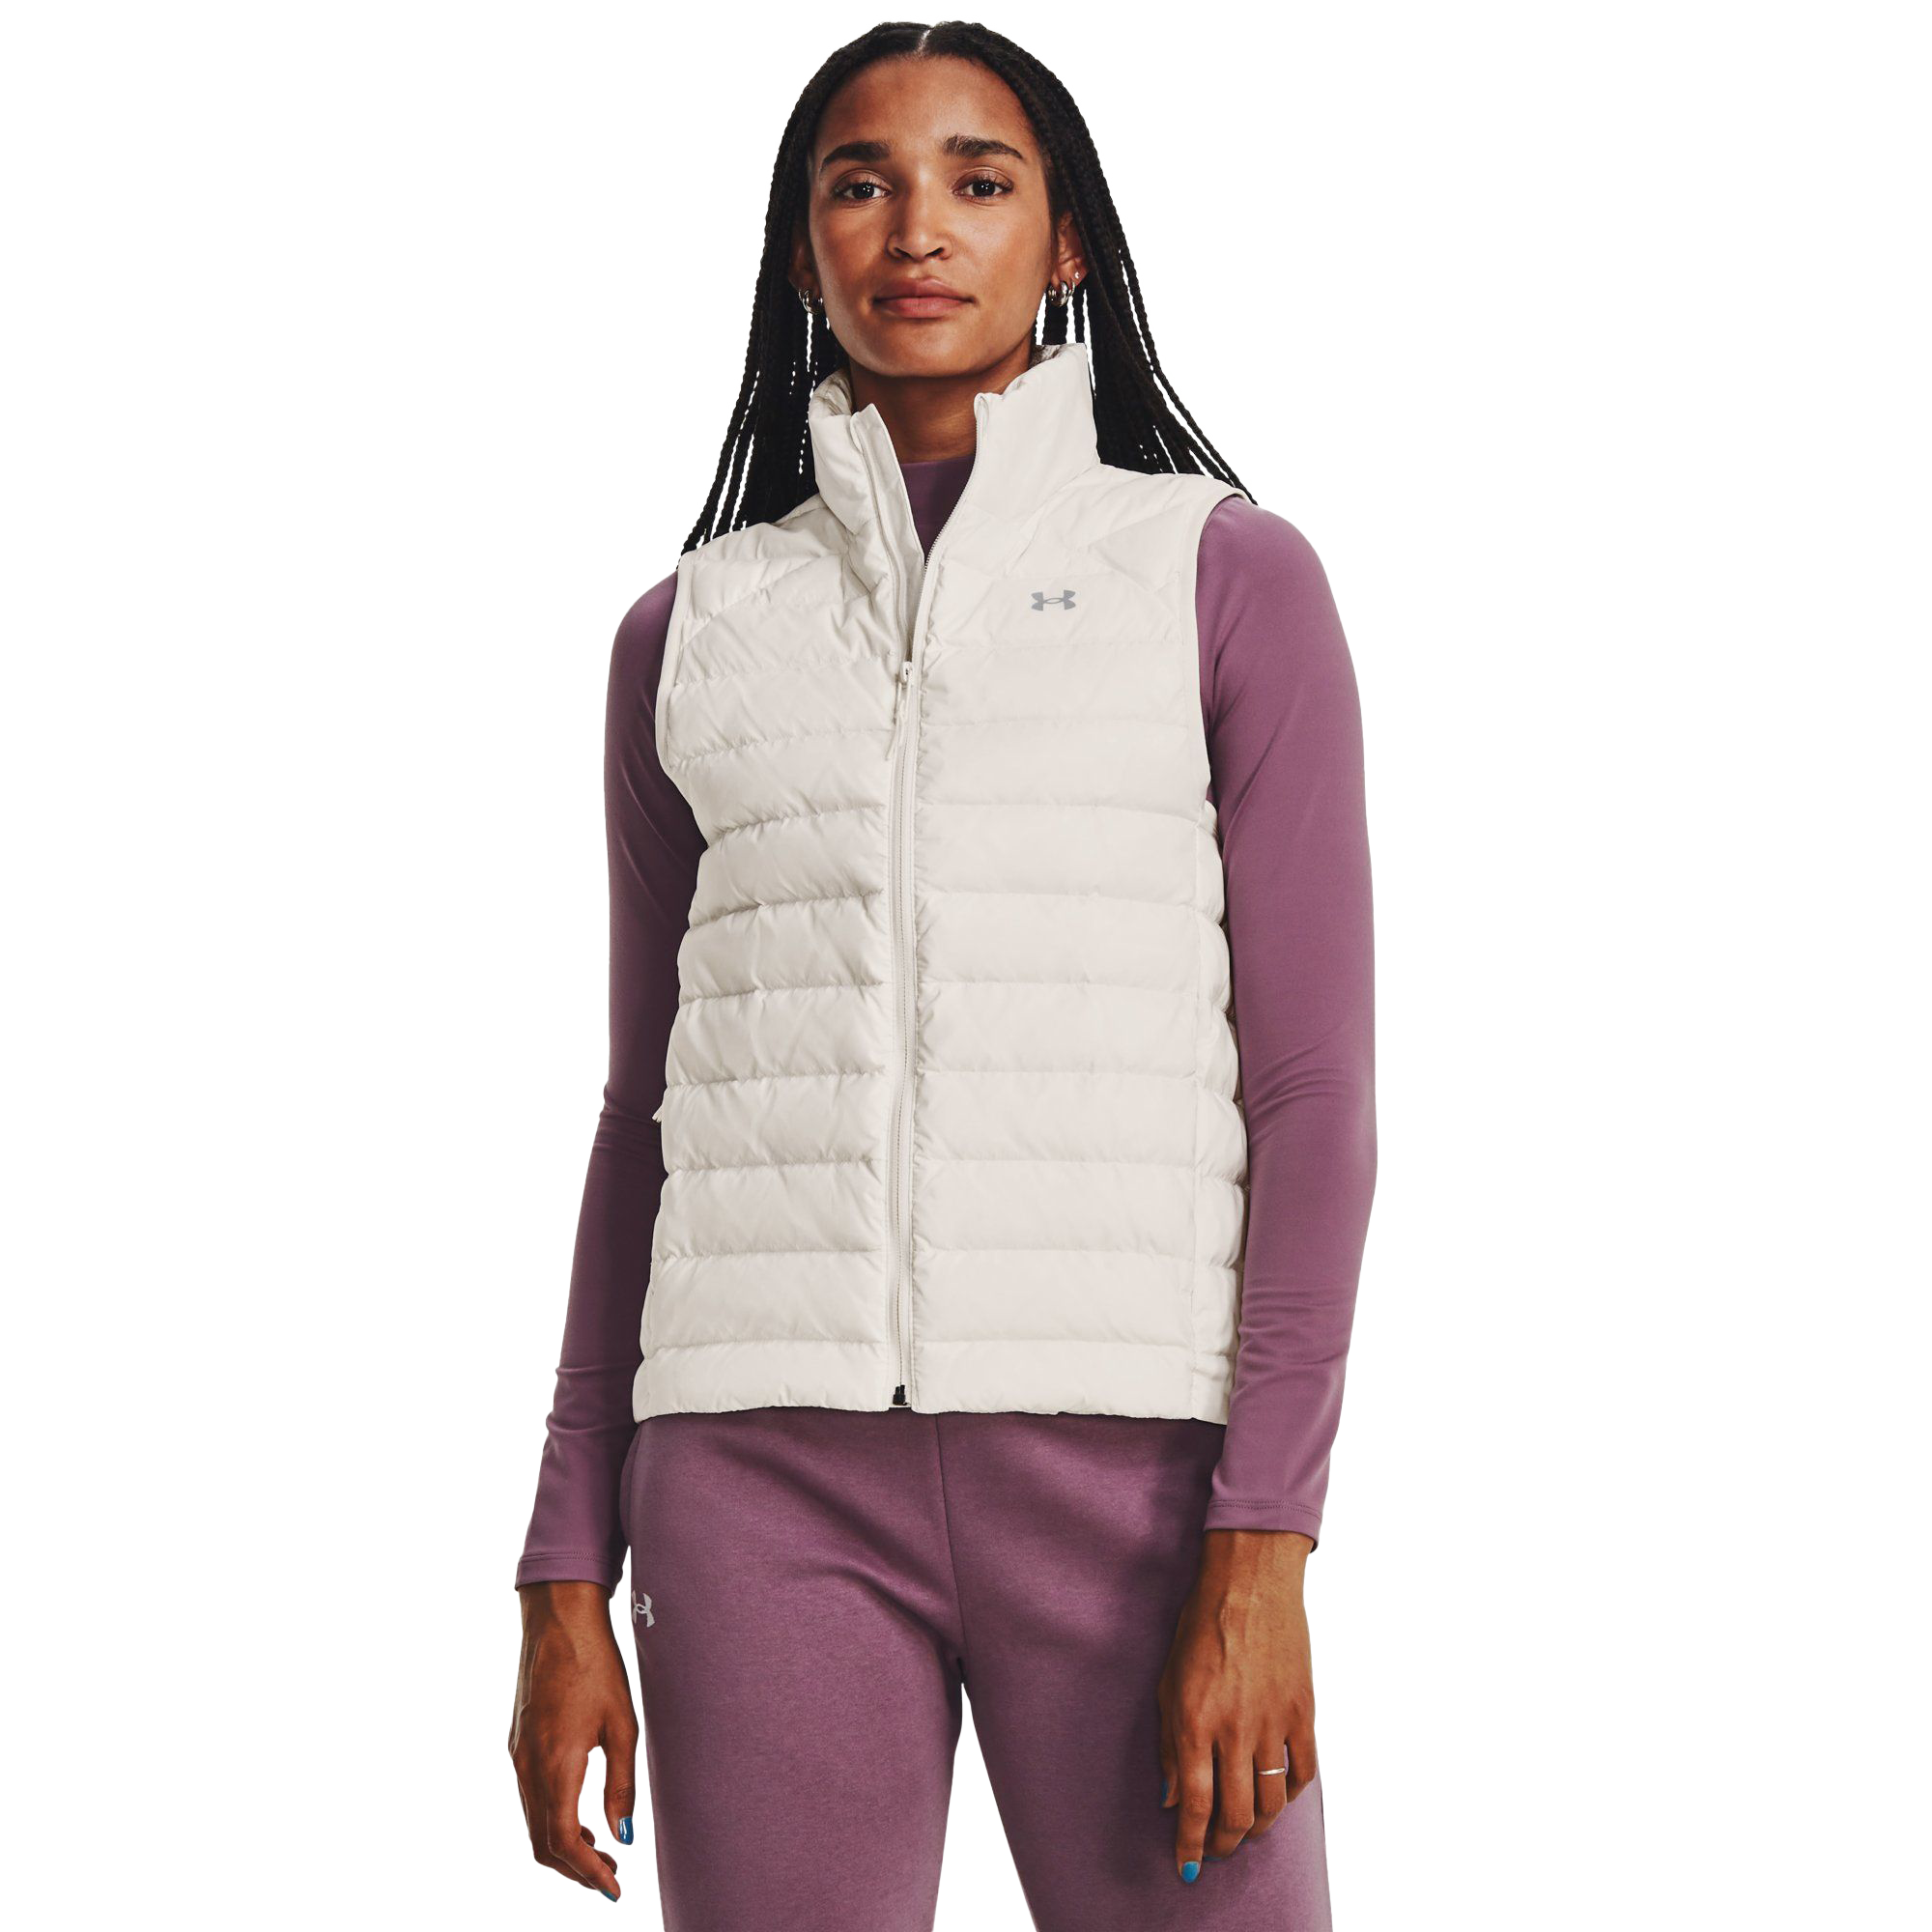 Under Armour Storm Armour Down 2.0 Vest for Ladies - Onyx White/Mod Gray - XS